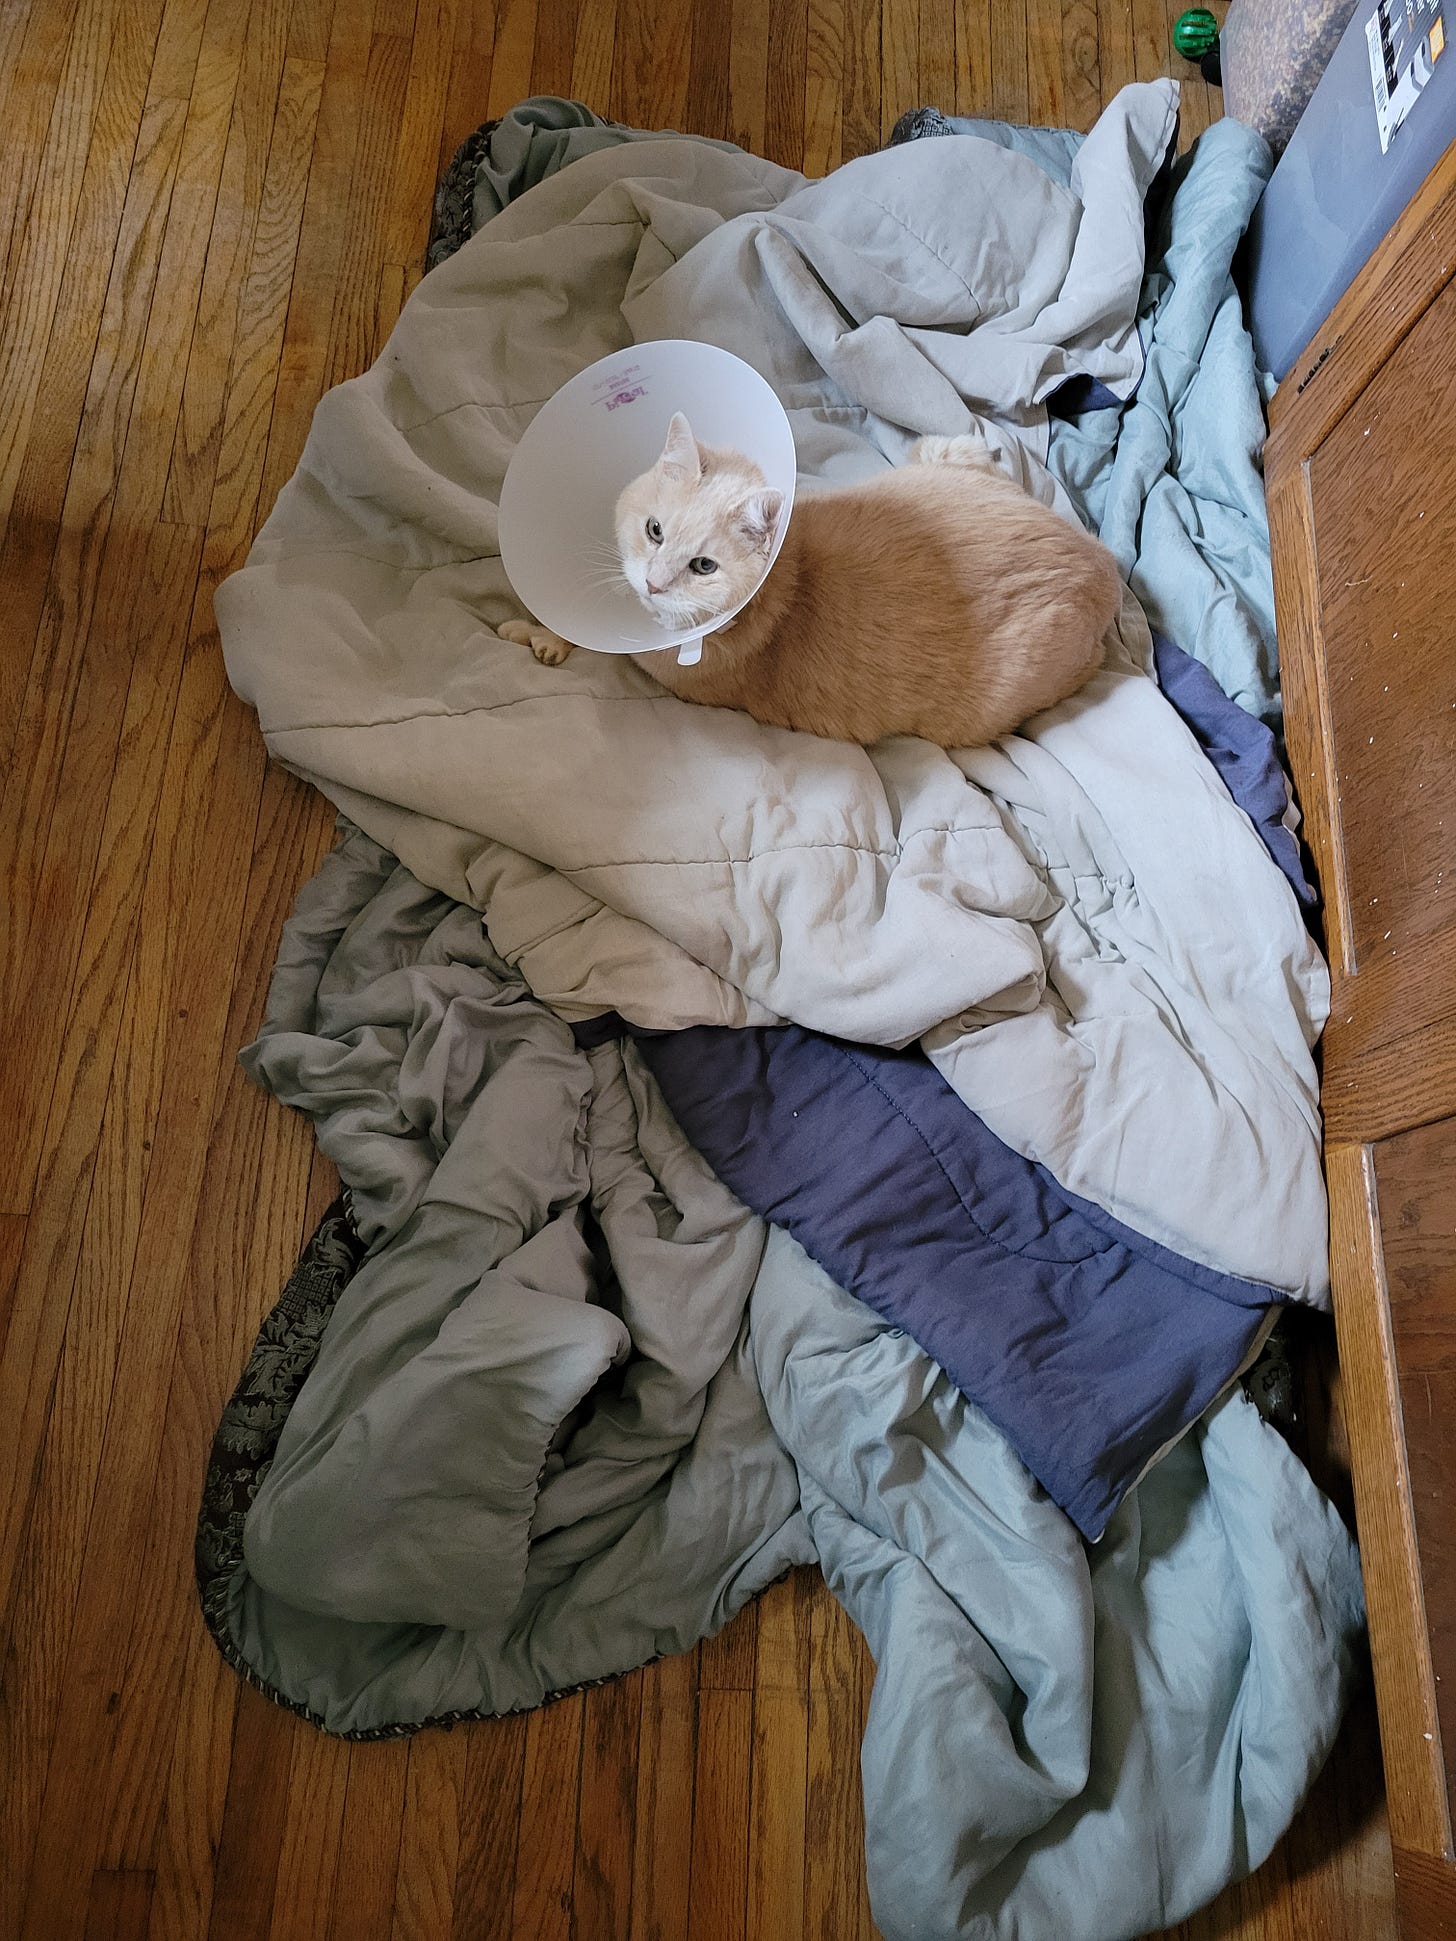 A ginger cat wearing a cone is settled into a pile of blankets on the florr.